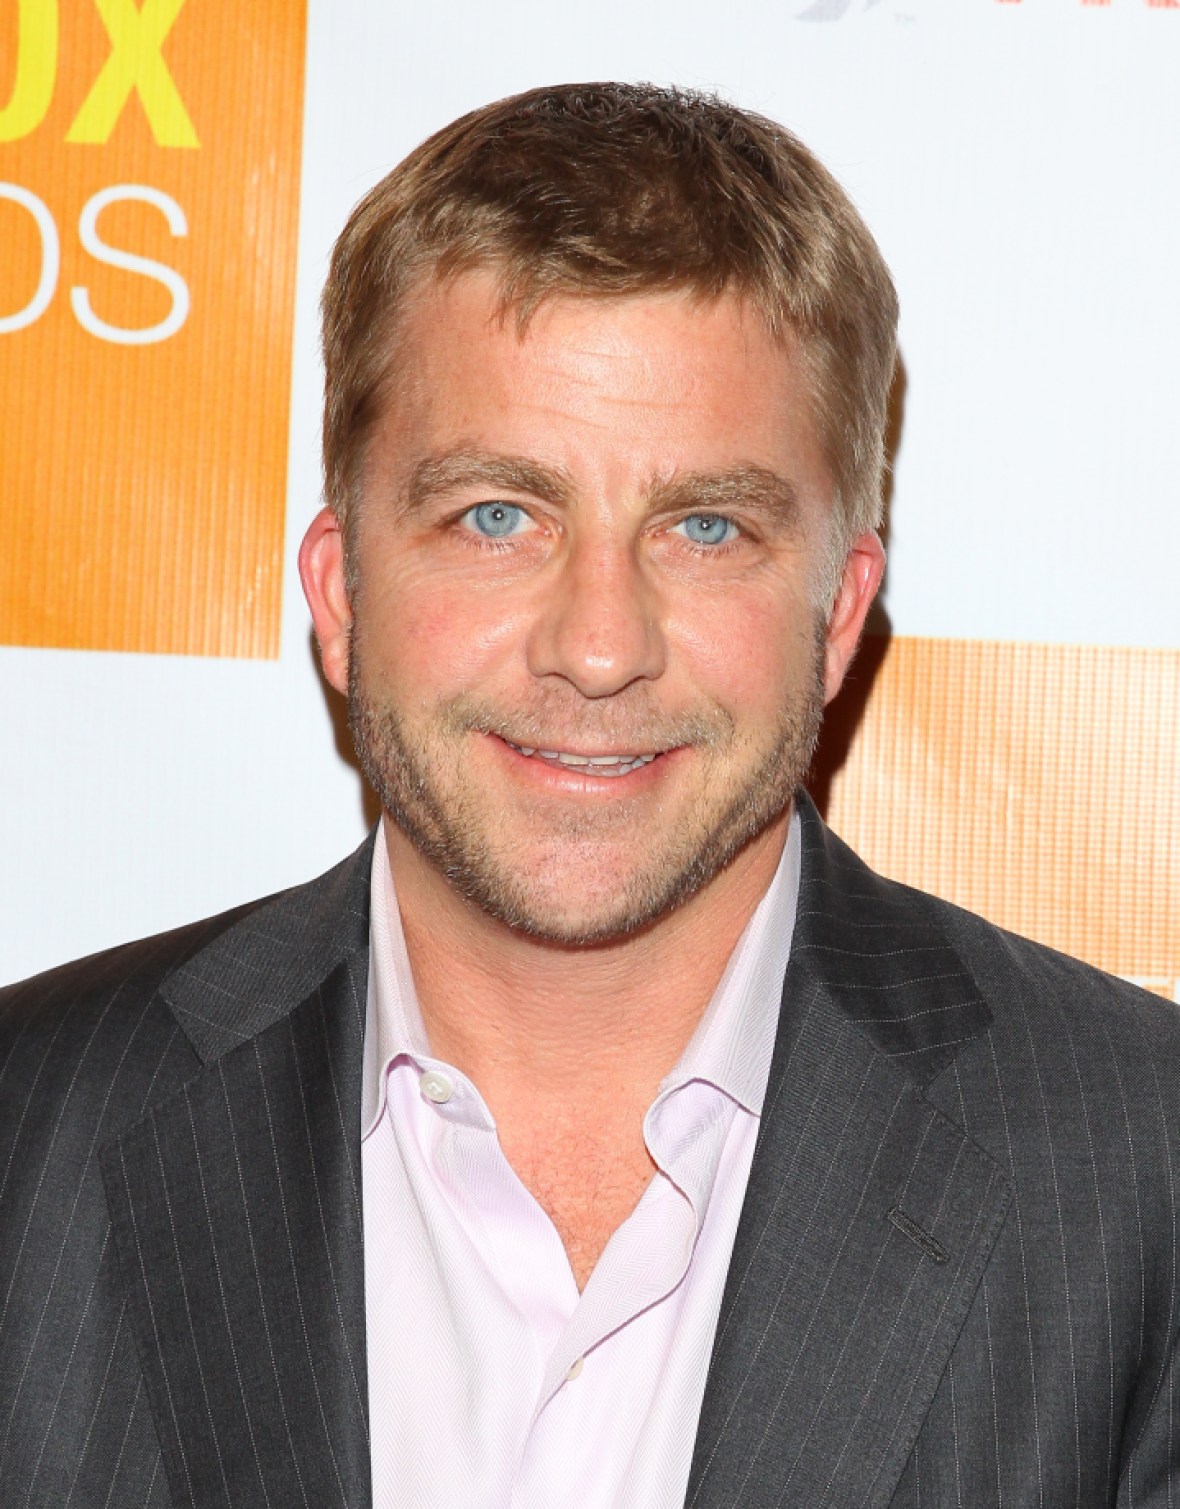 'A Christmas Story' Star Peter Billingsley (aka Ralphie Parker) is Engaged to Buffy Bains